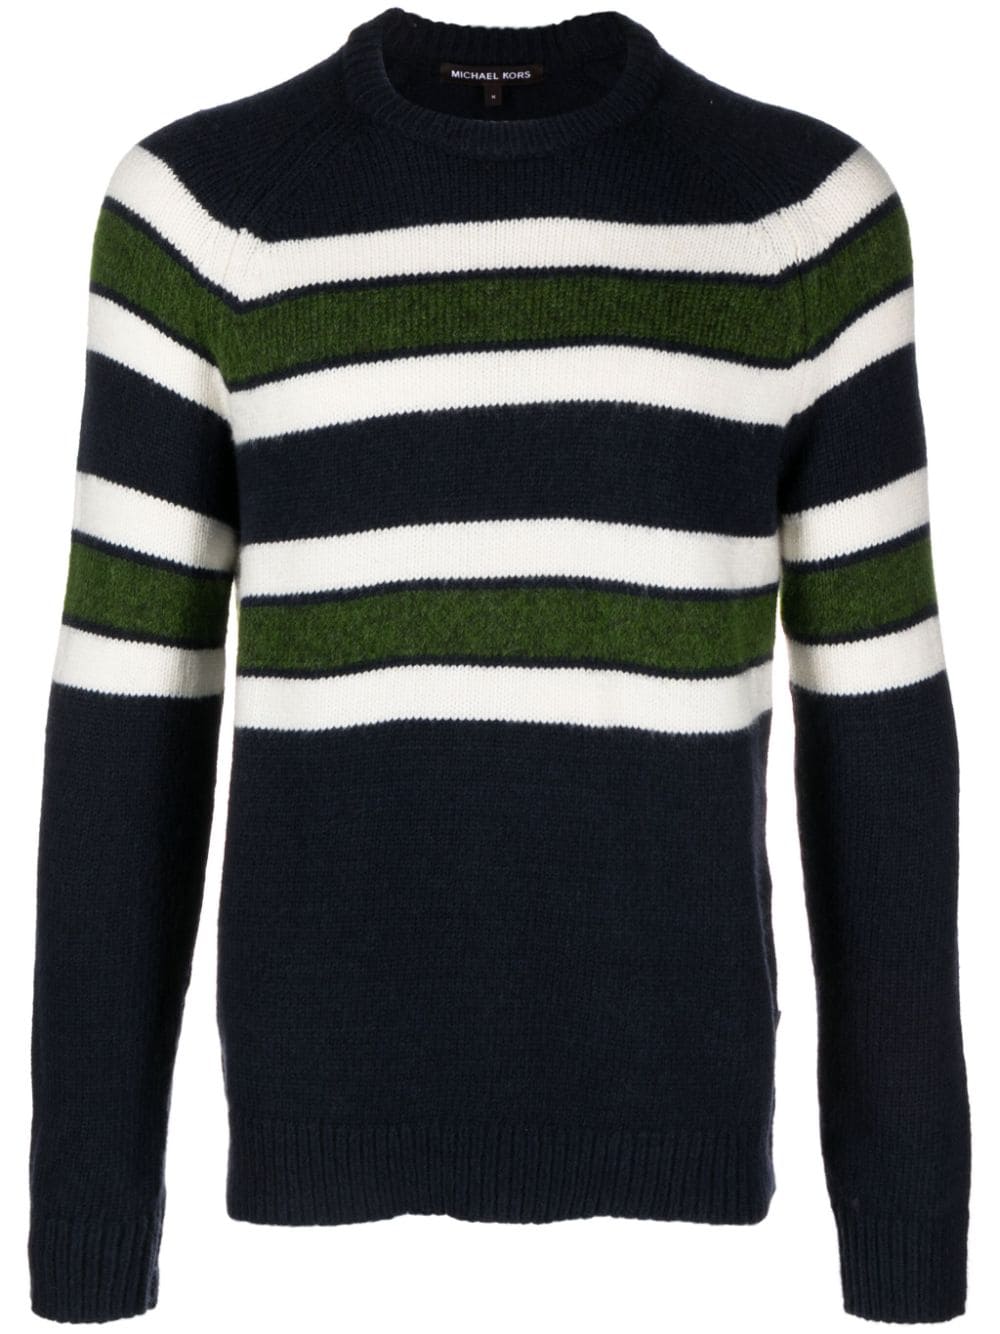 Michael Kors Collection intarsia-knit striped jumper - Blue von Michael Kors Collection